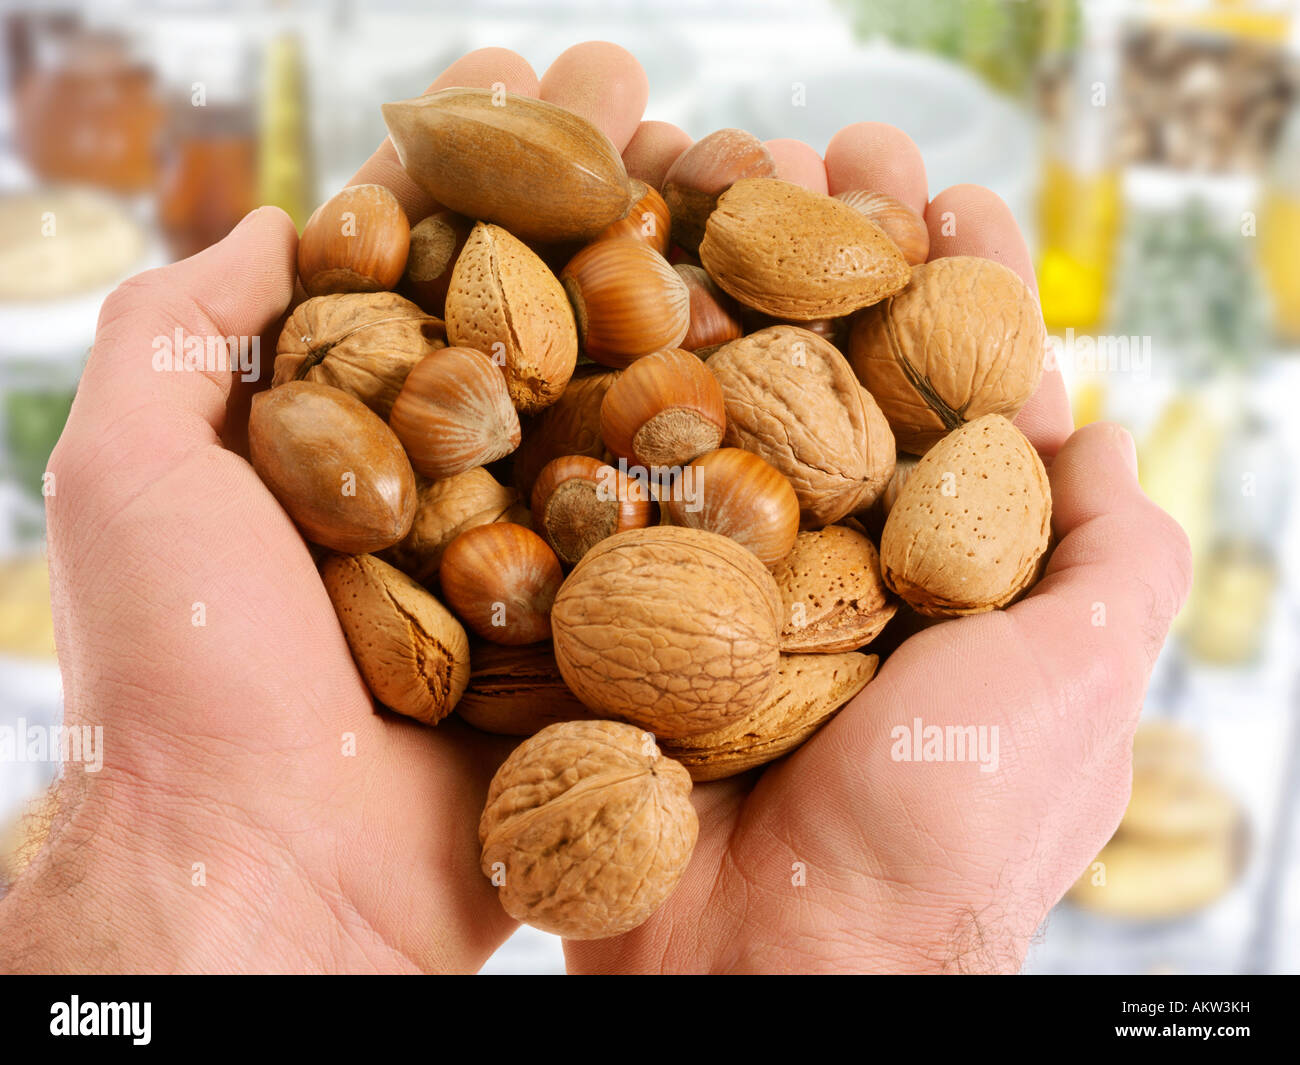 HANDFUL OF MIXED NUTS Stock Photo